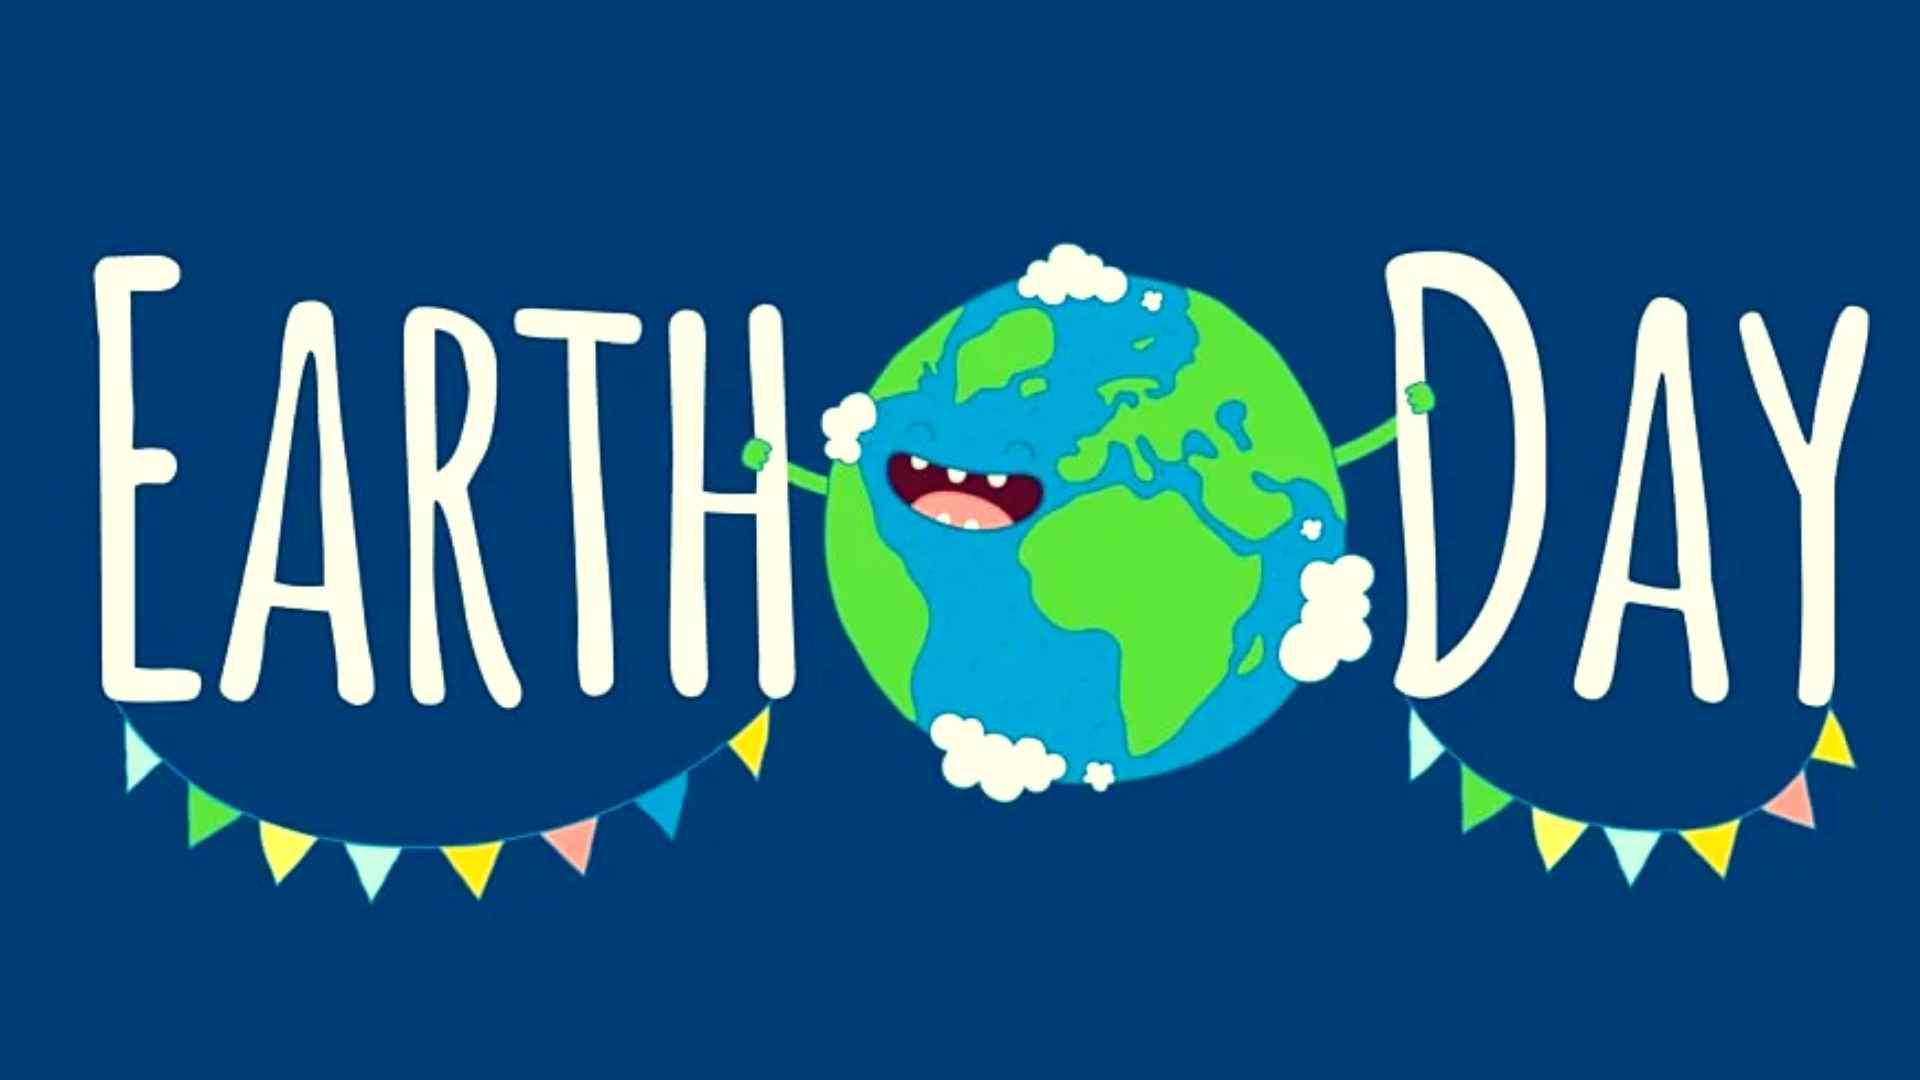 Happy Earth Day 22 April 2022 Images